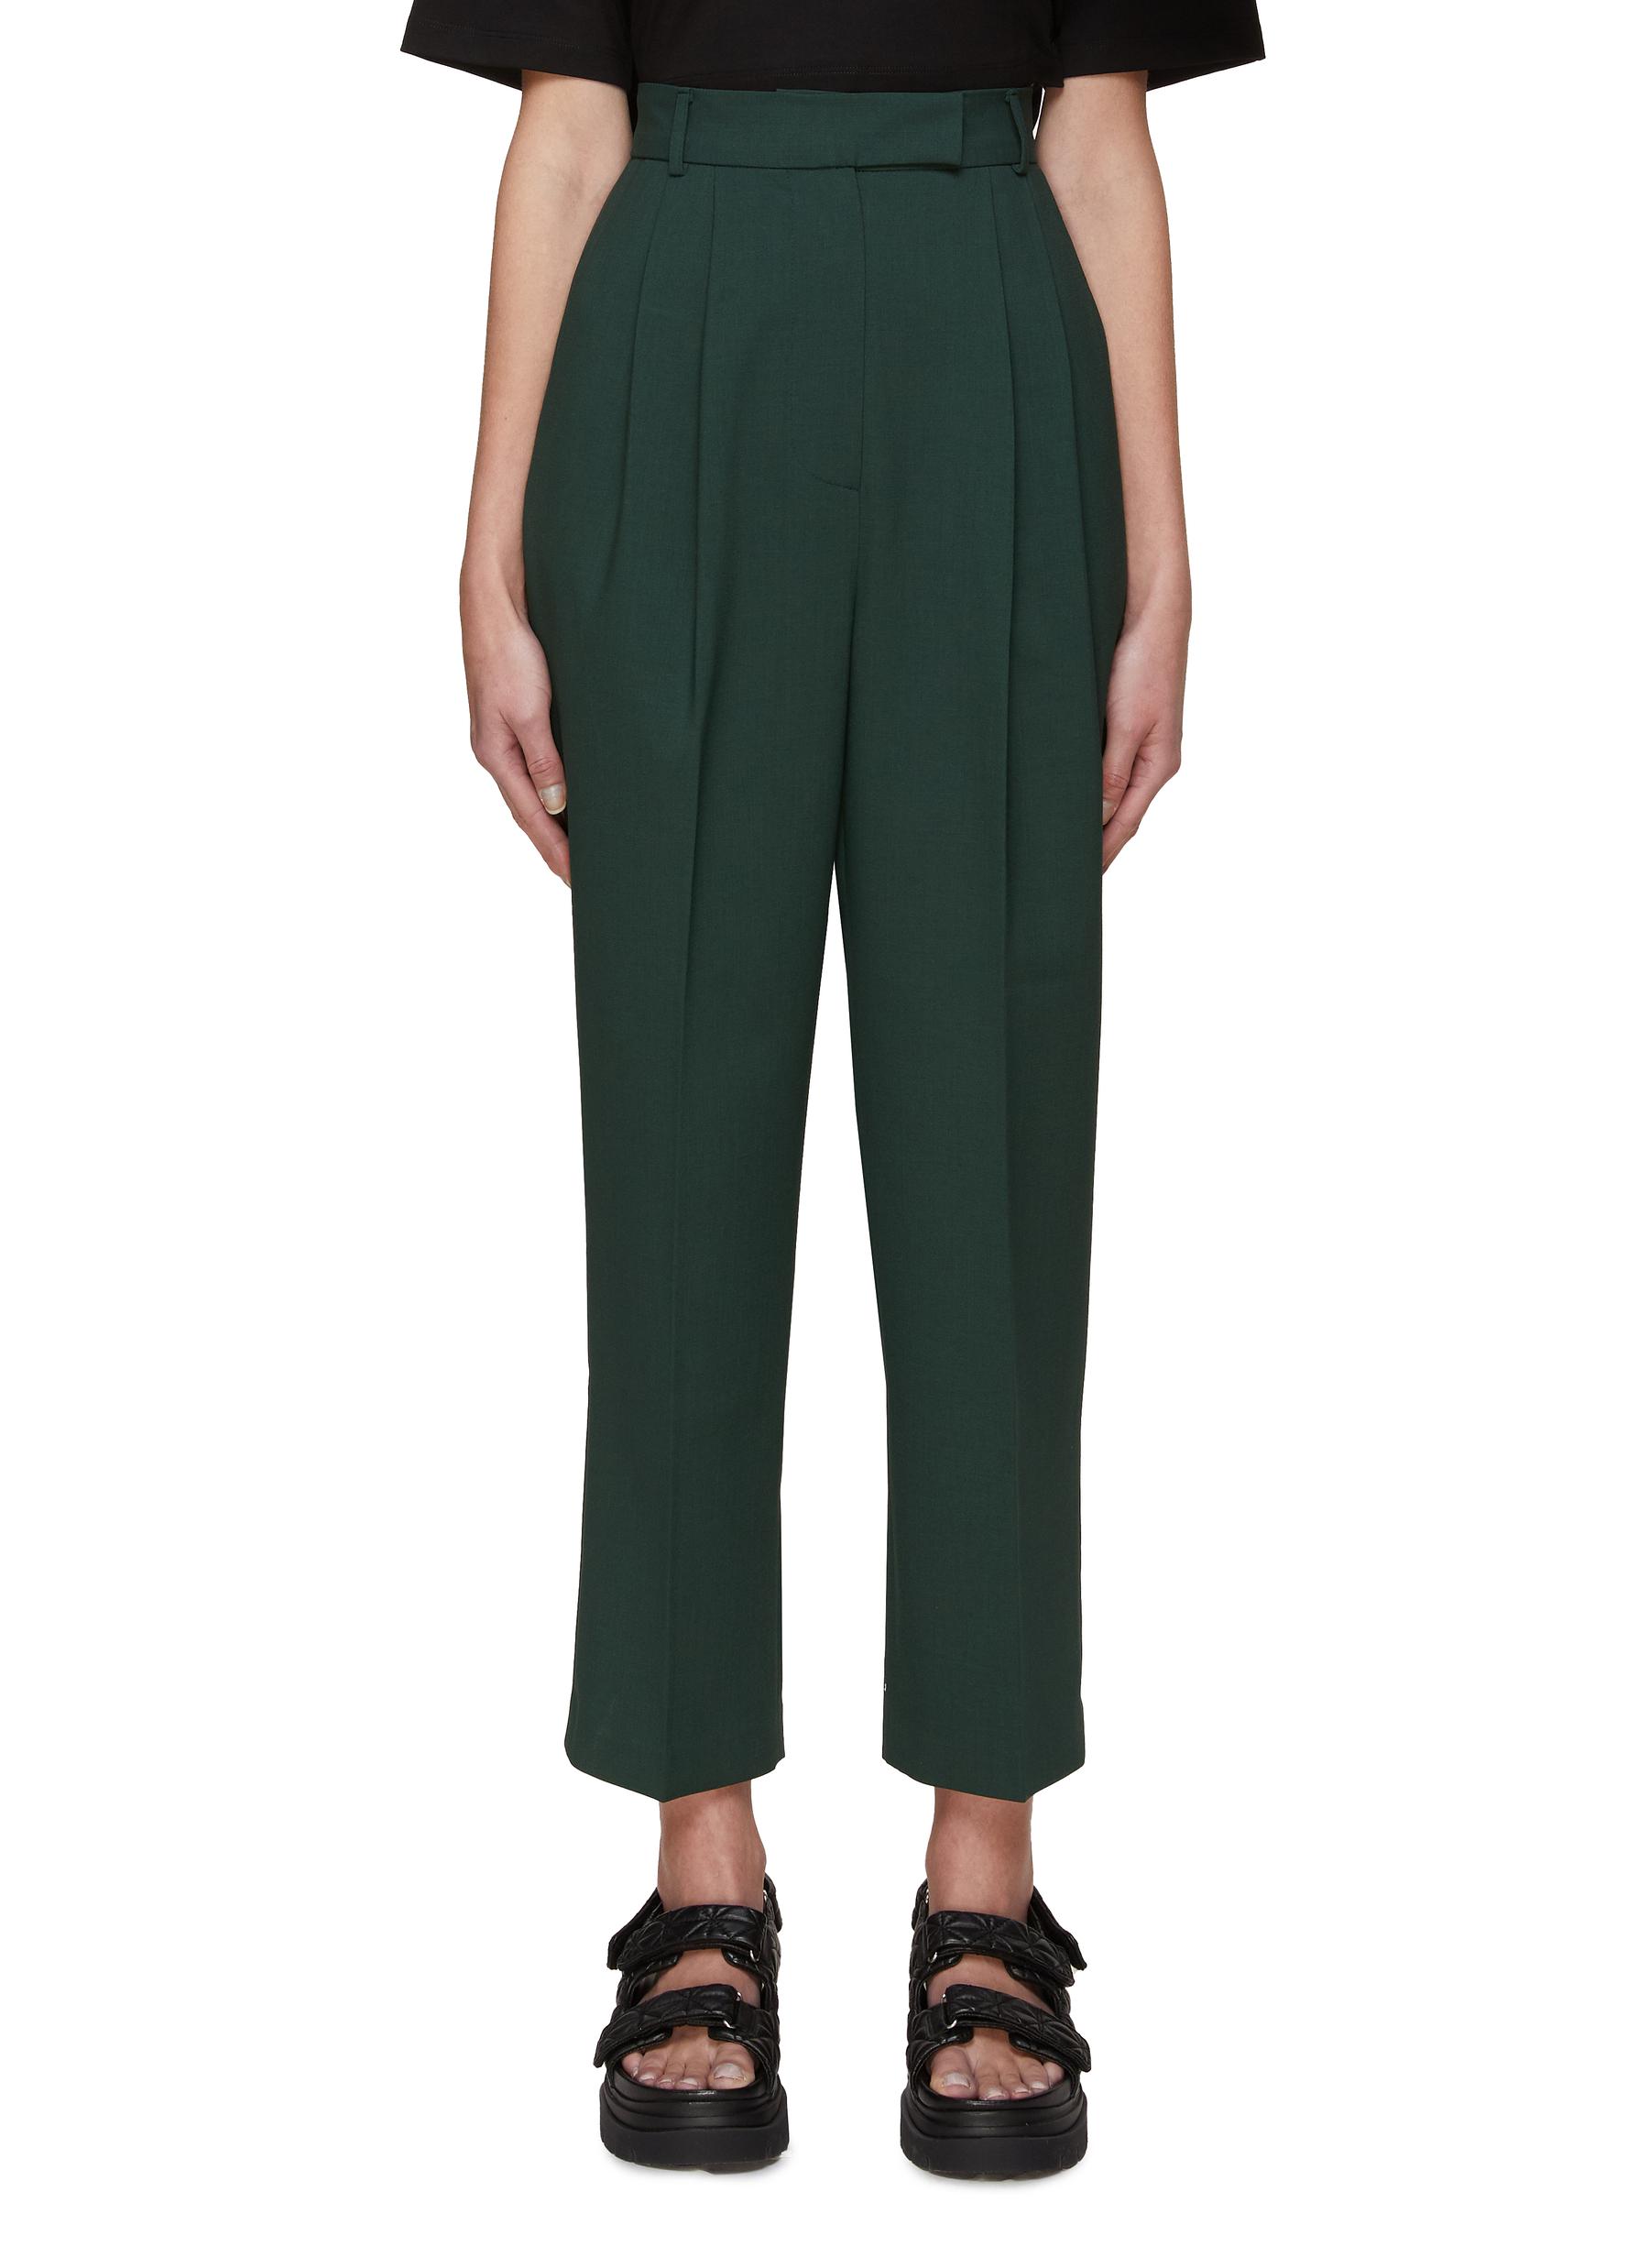 The Frankie Shop 'bea' Pleated Suiting Pants In Green | ModeSens